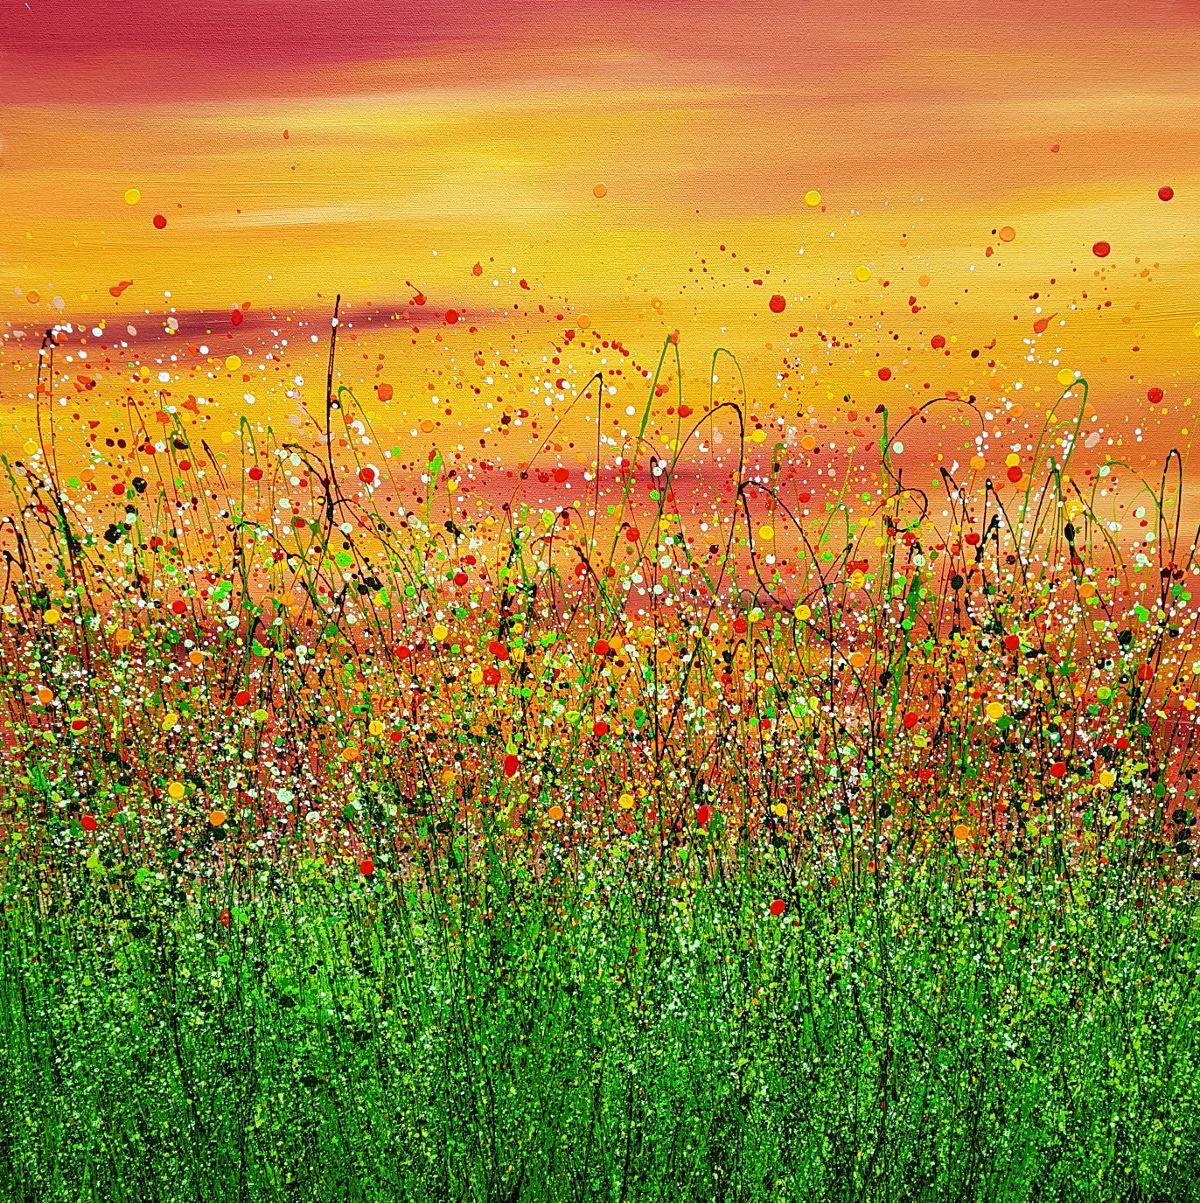 Red Sky In The Morning #10 by Lucy Moore